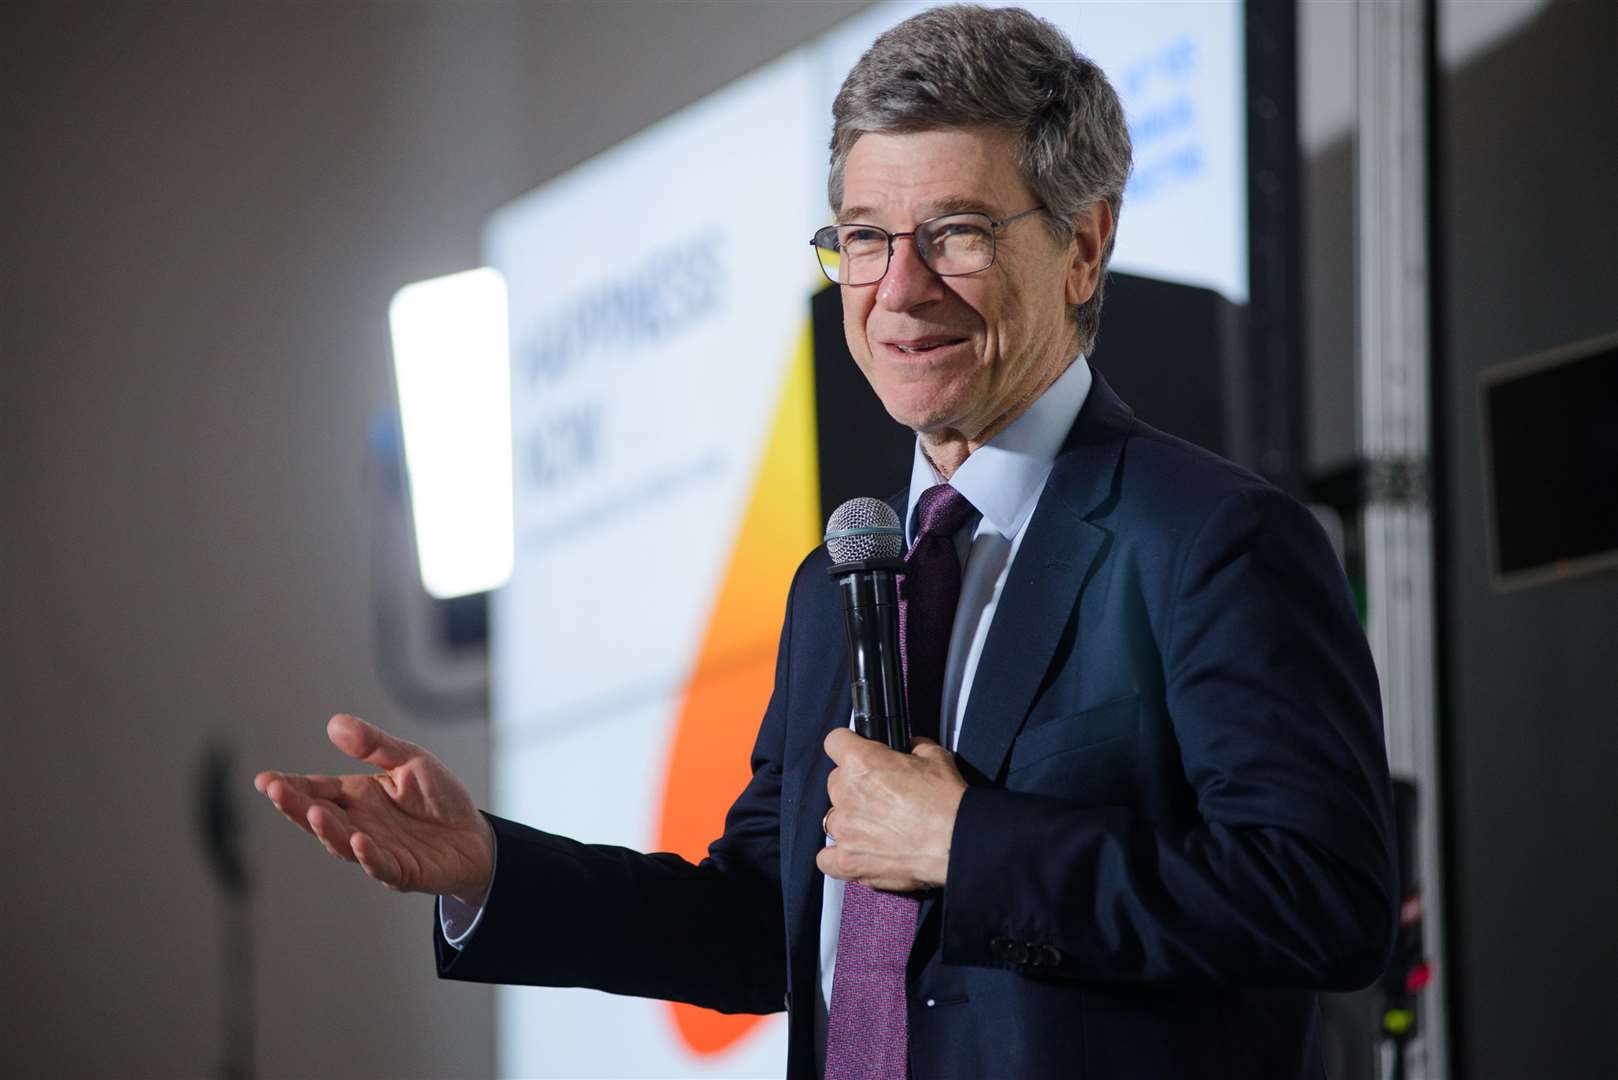 Internationally recognised economist Professor Jeffrey D Sachs will deliver the 2021 University of the Highlands and Islands annual lecture.